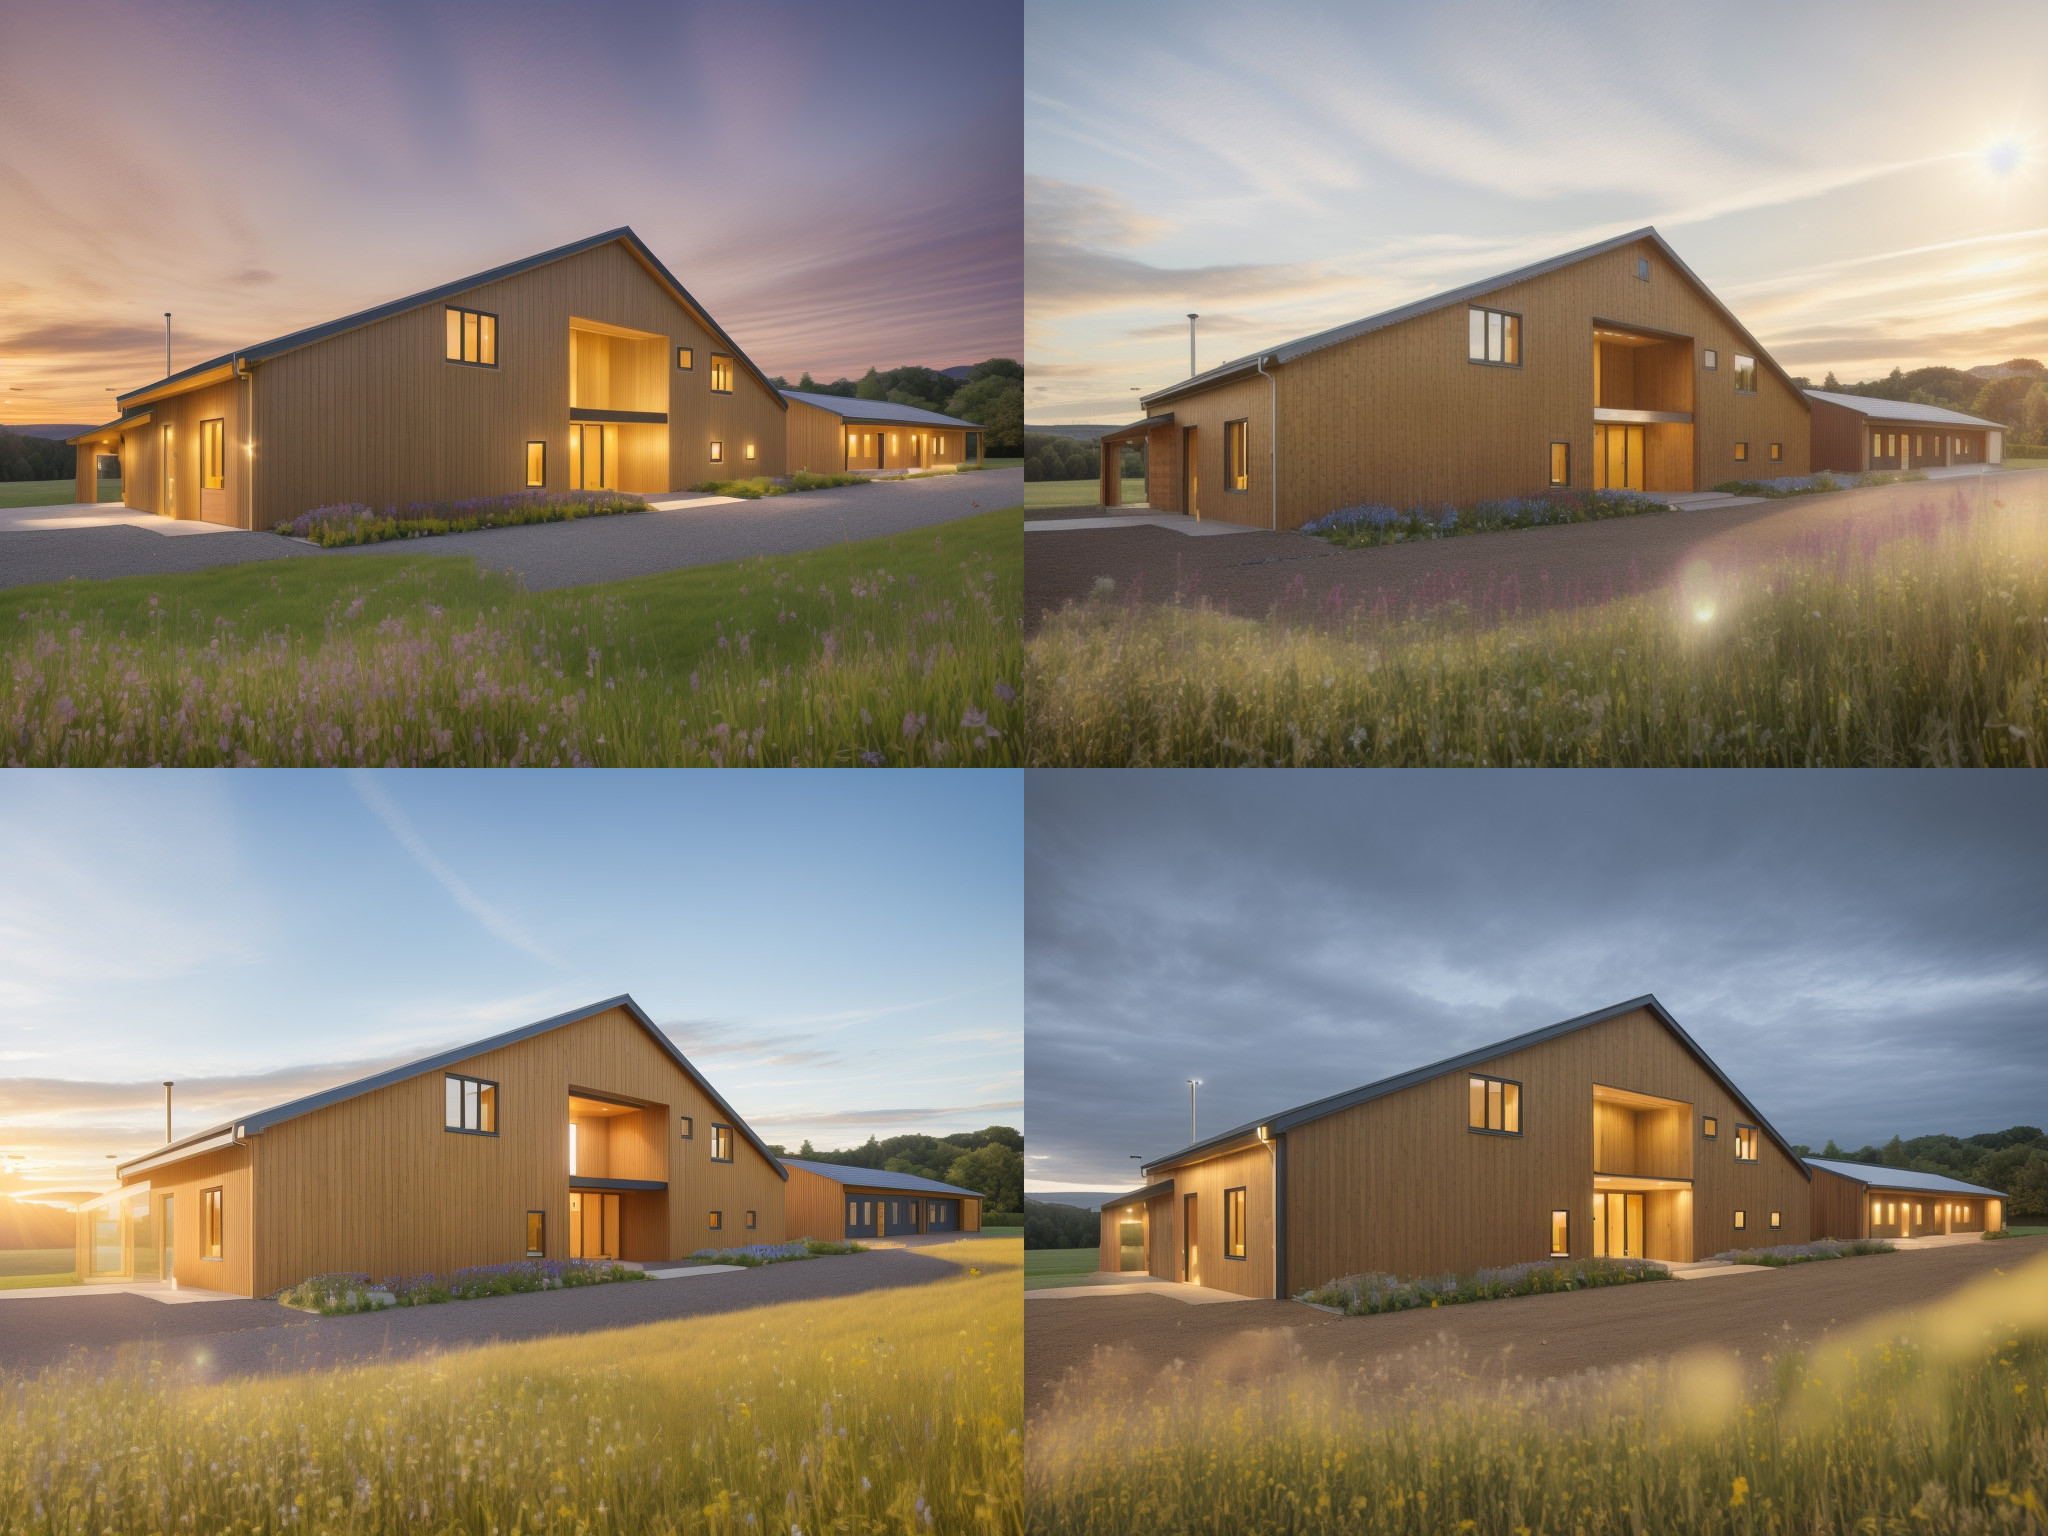 A grid of 4 different looks and lighting scenarios for the modern barn conversion rendered in AI